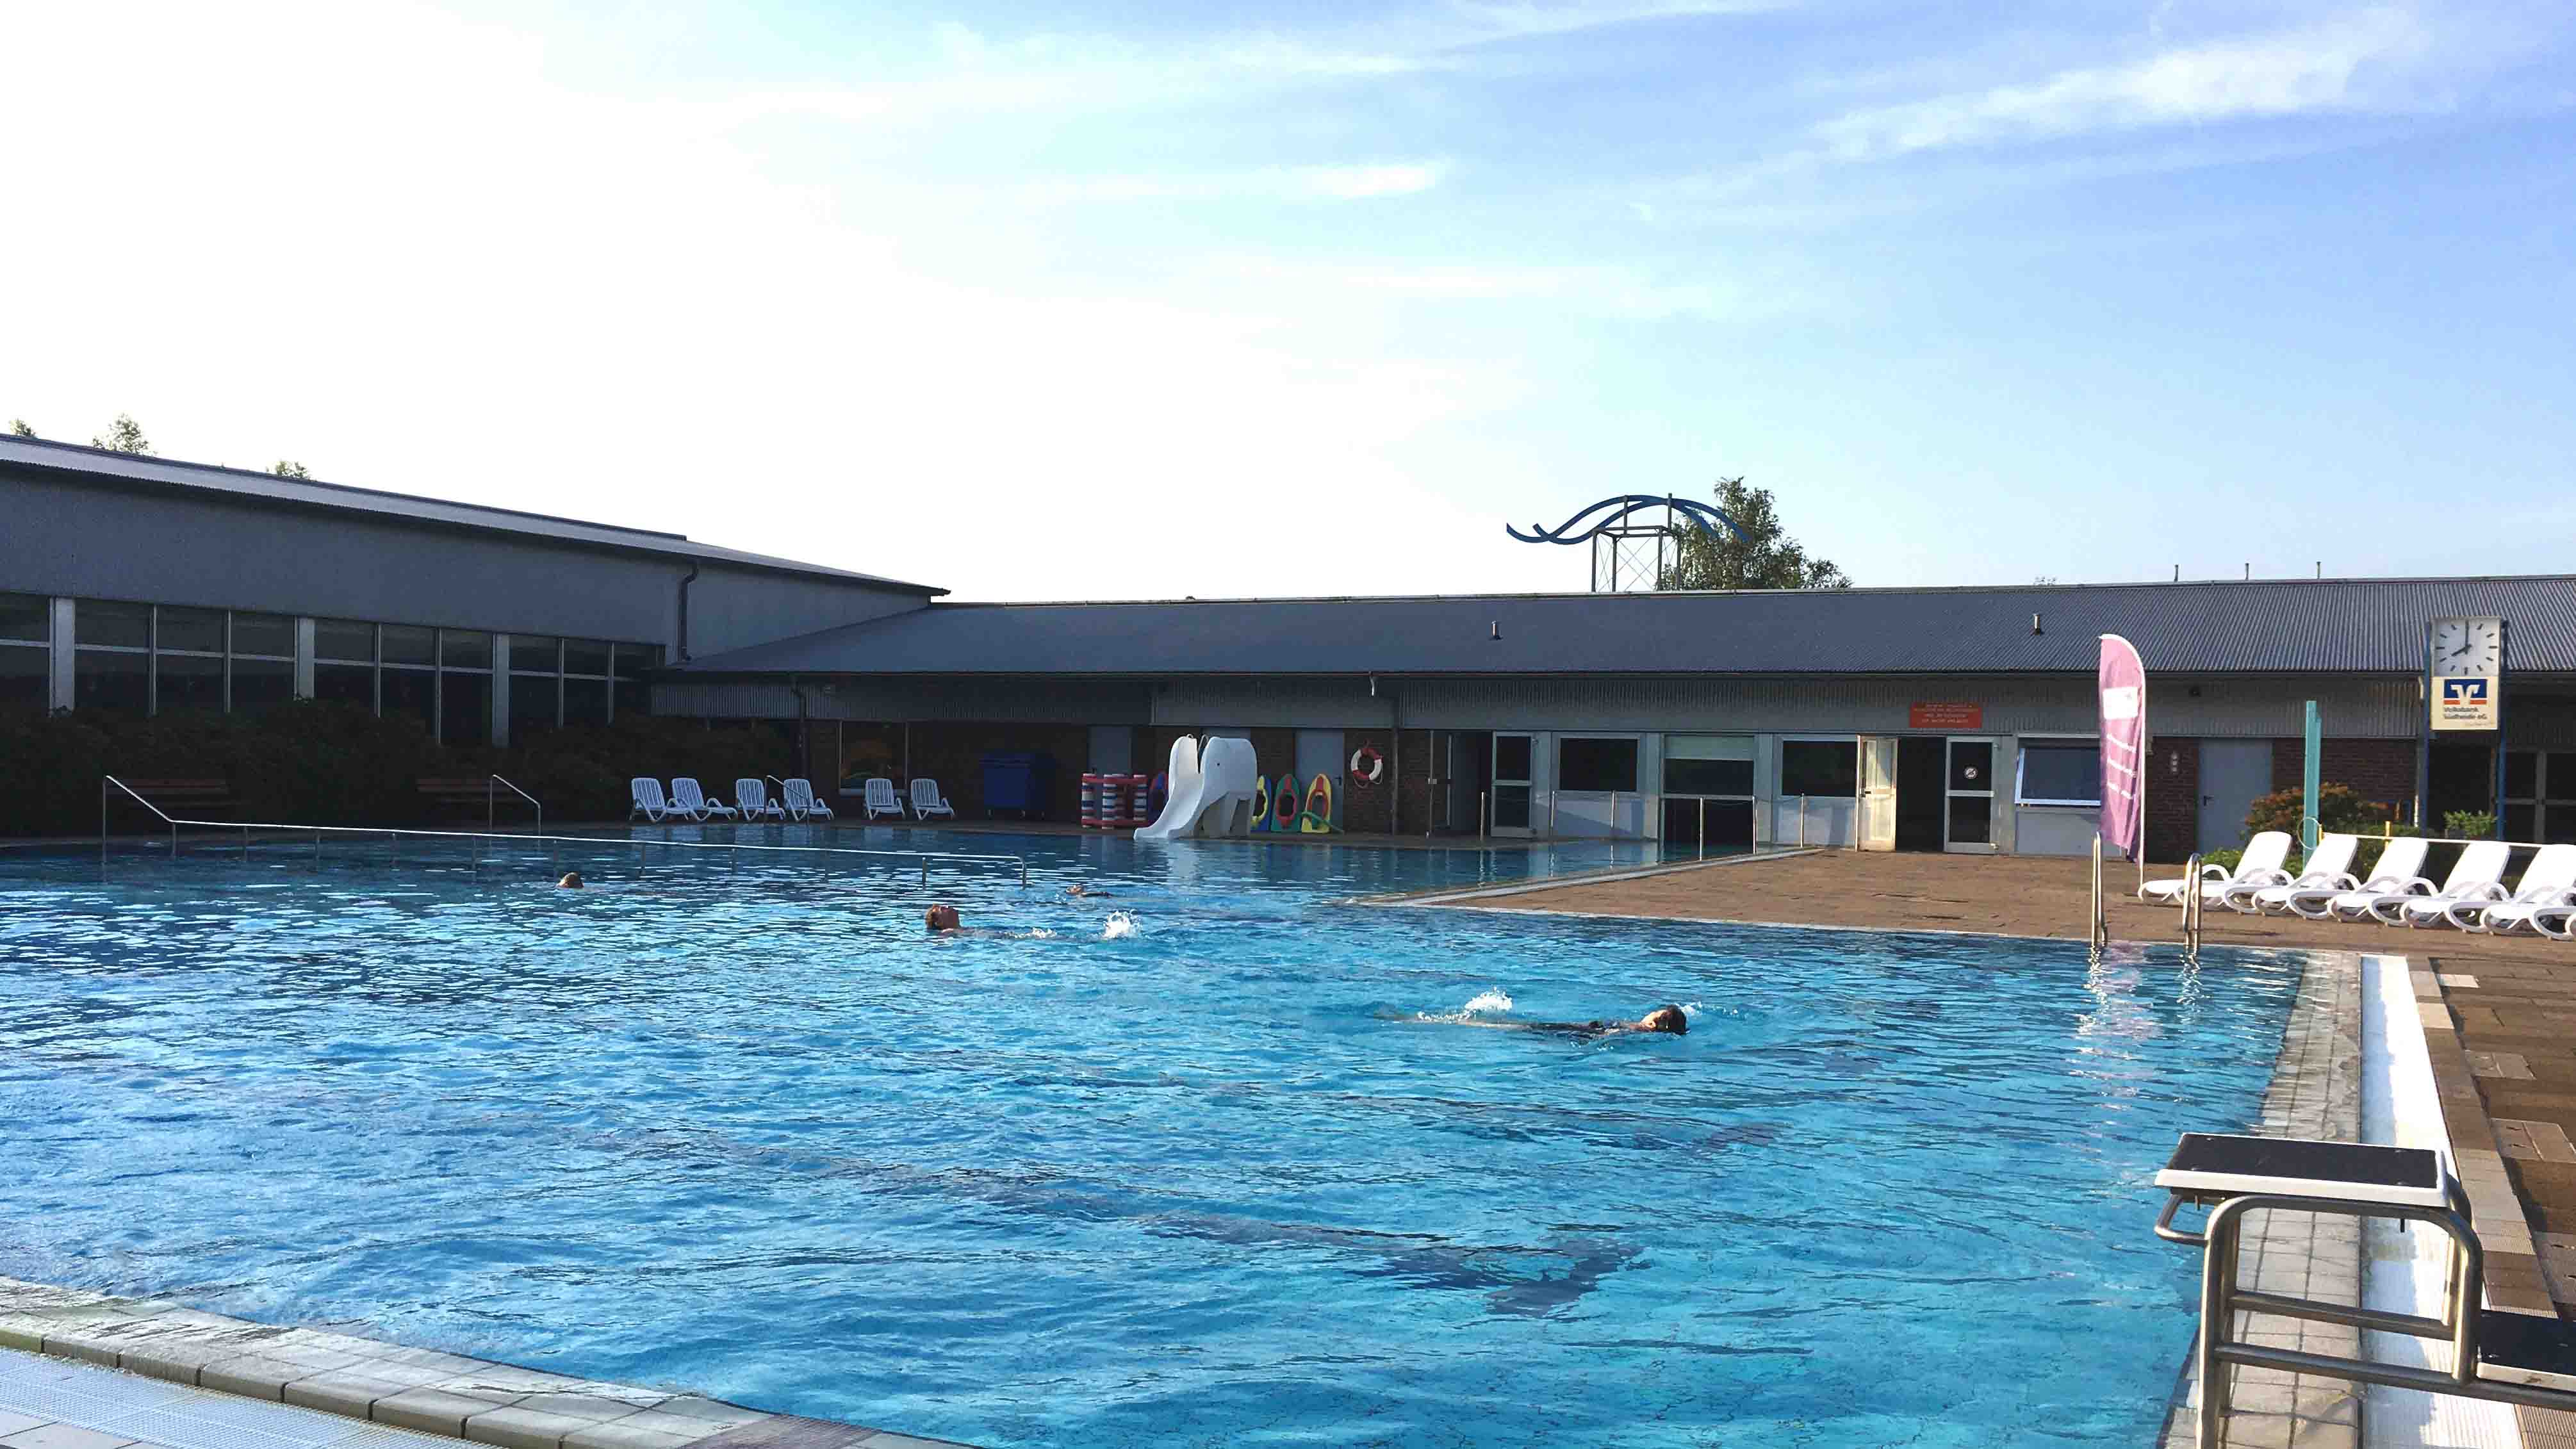 The open-air pool in Winsen